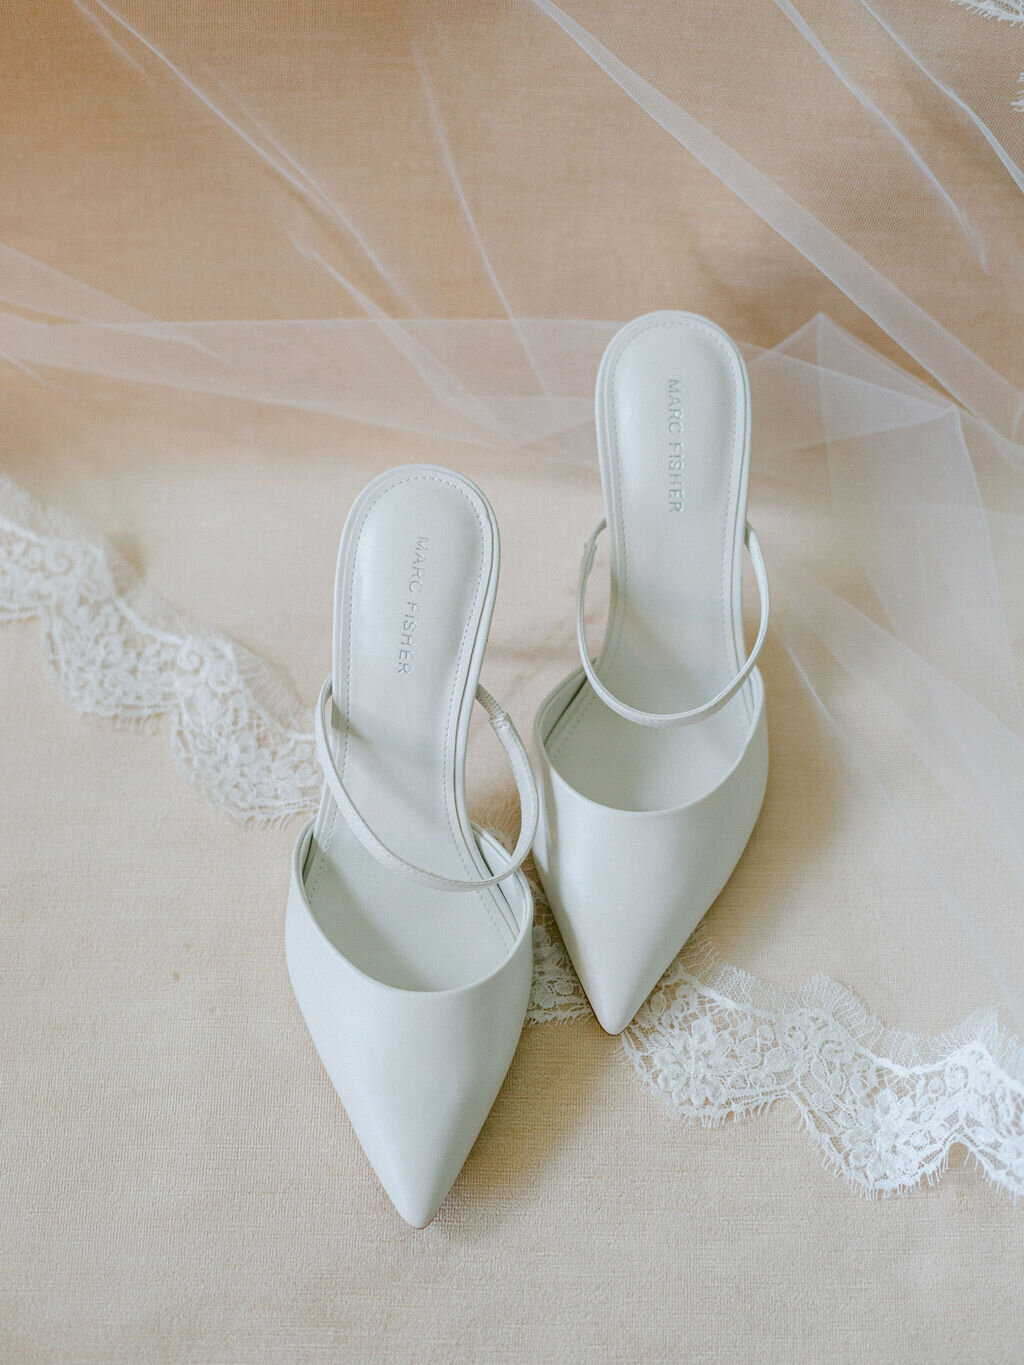 White wedding shoes on a lace veil for a wedding in Thomasville Georgia